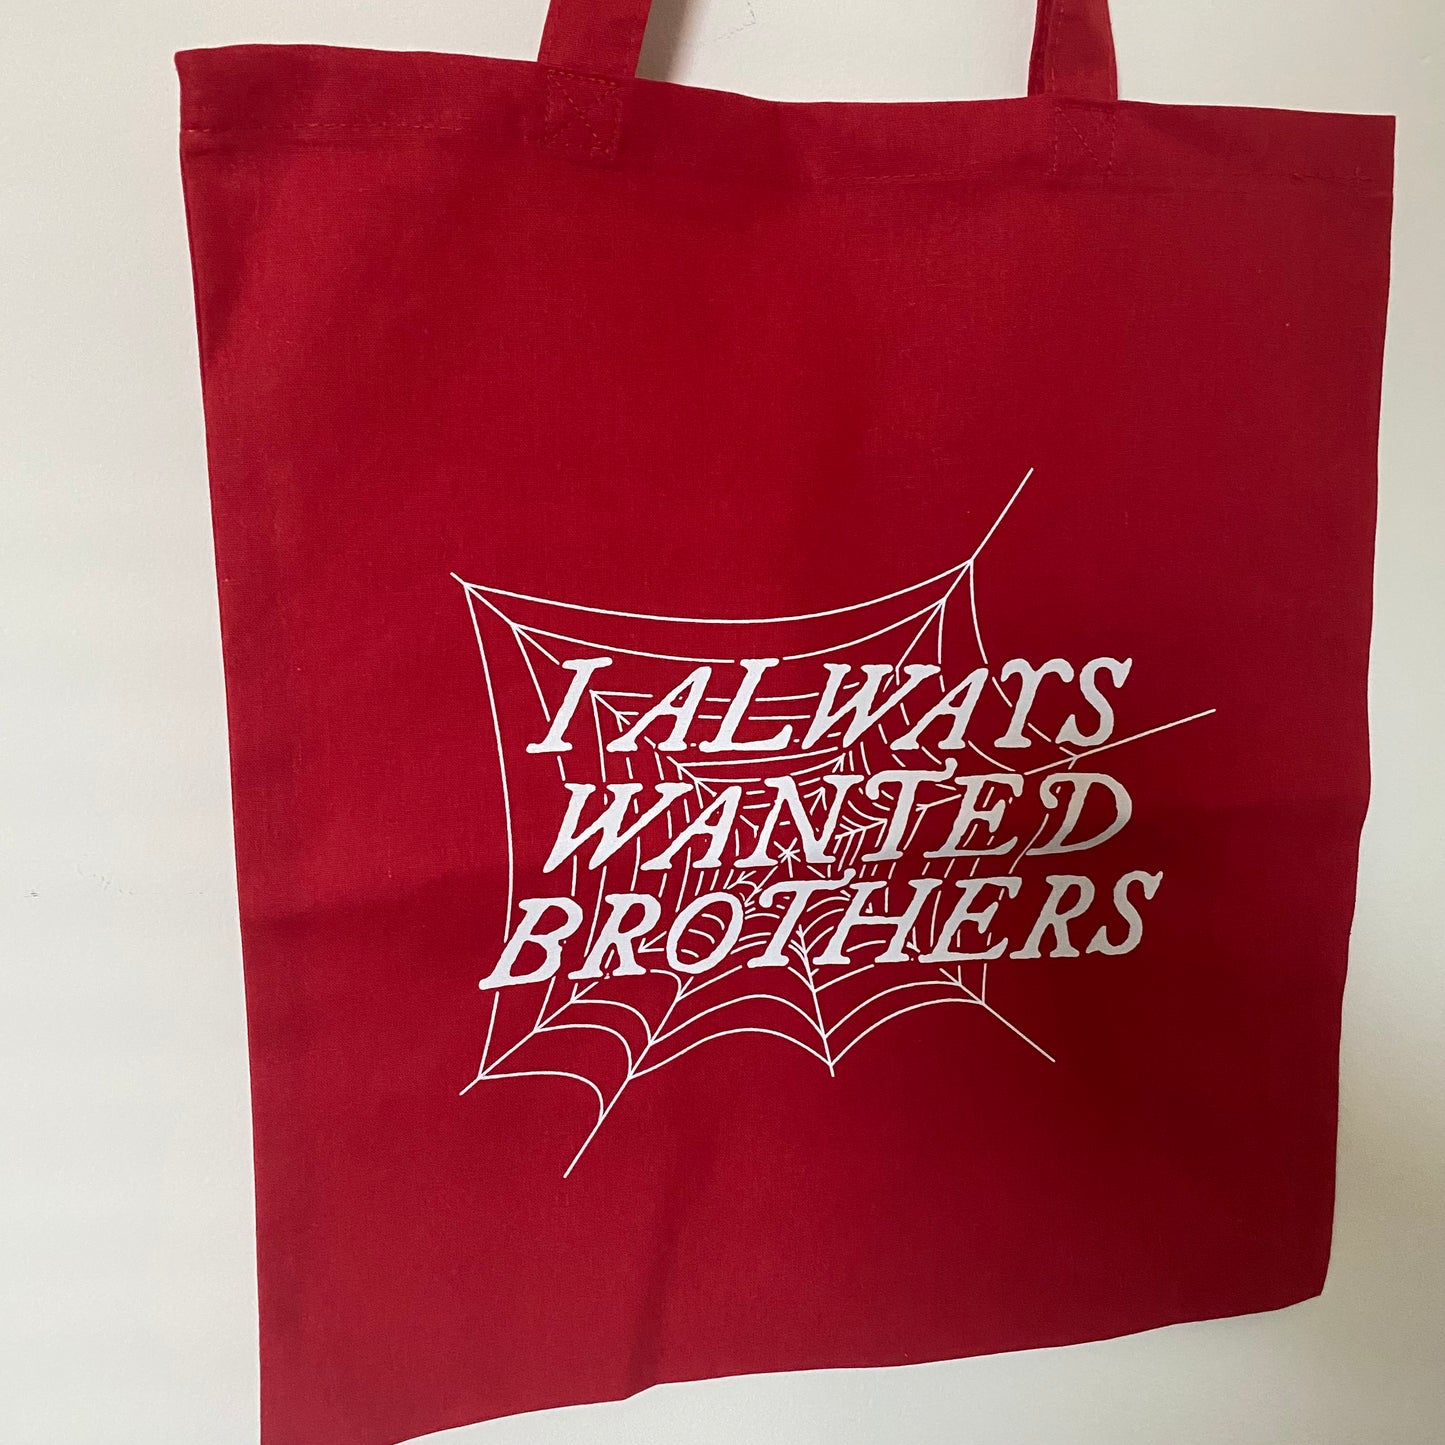 The Brothers Tote